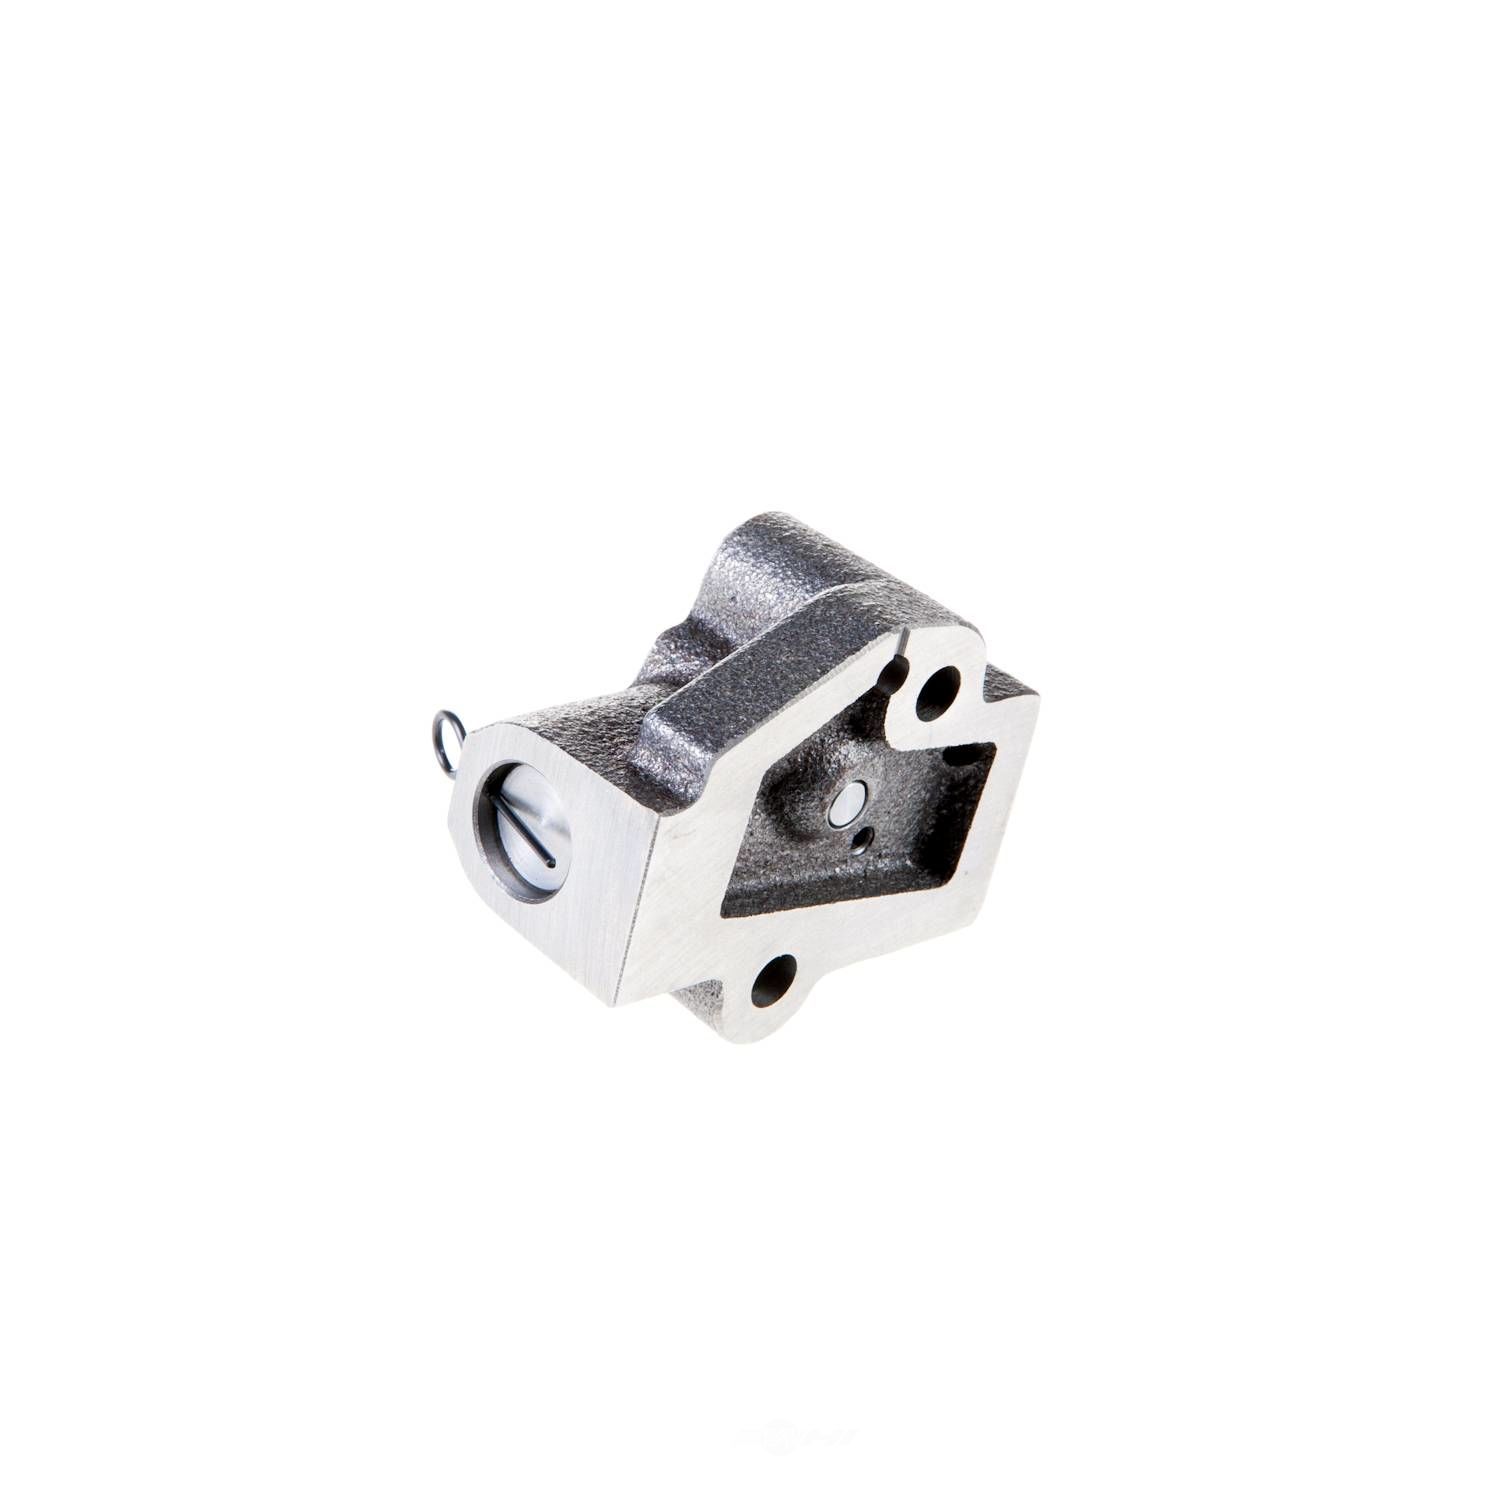 MELLING - Stock Engine Timing Chain Tensioner - MEL BT5436